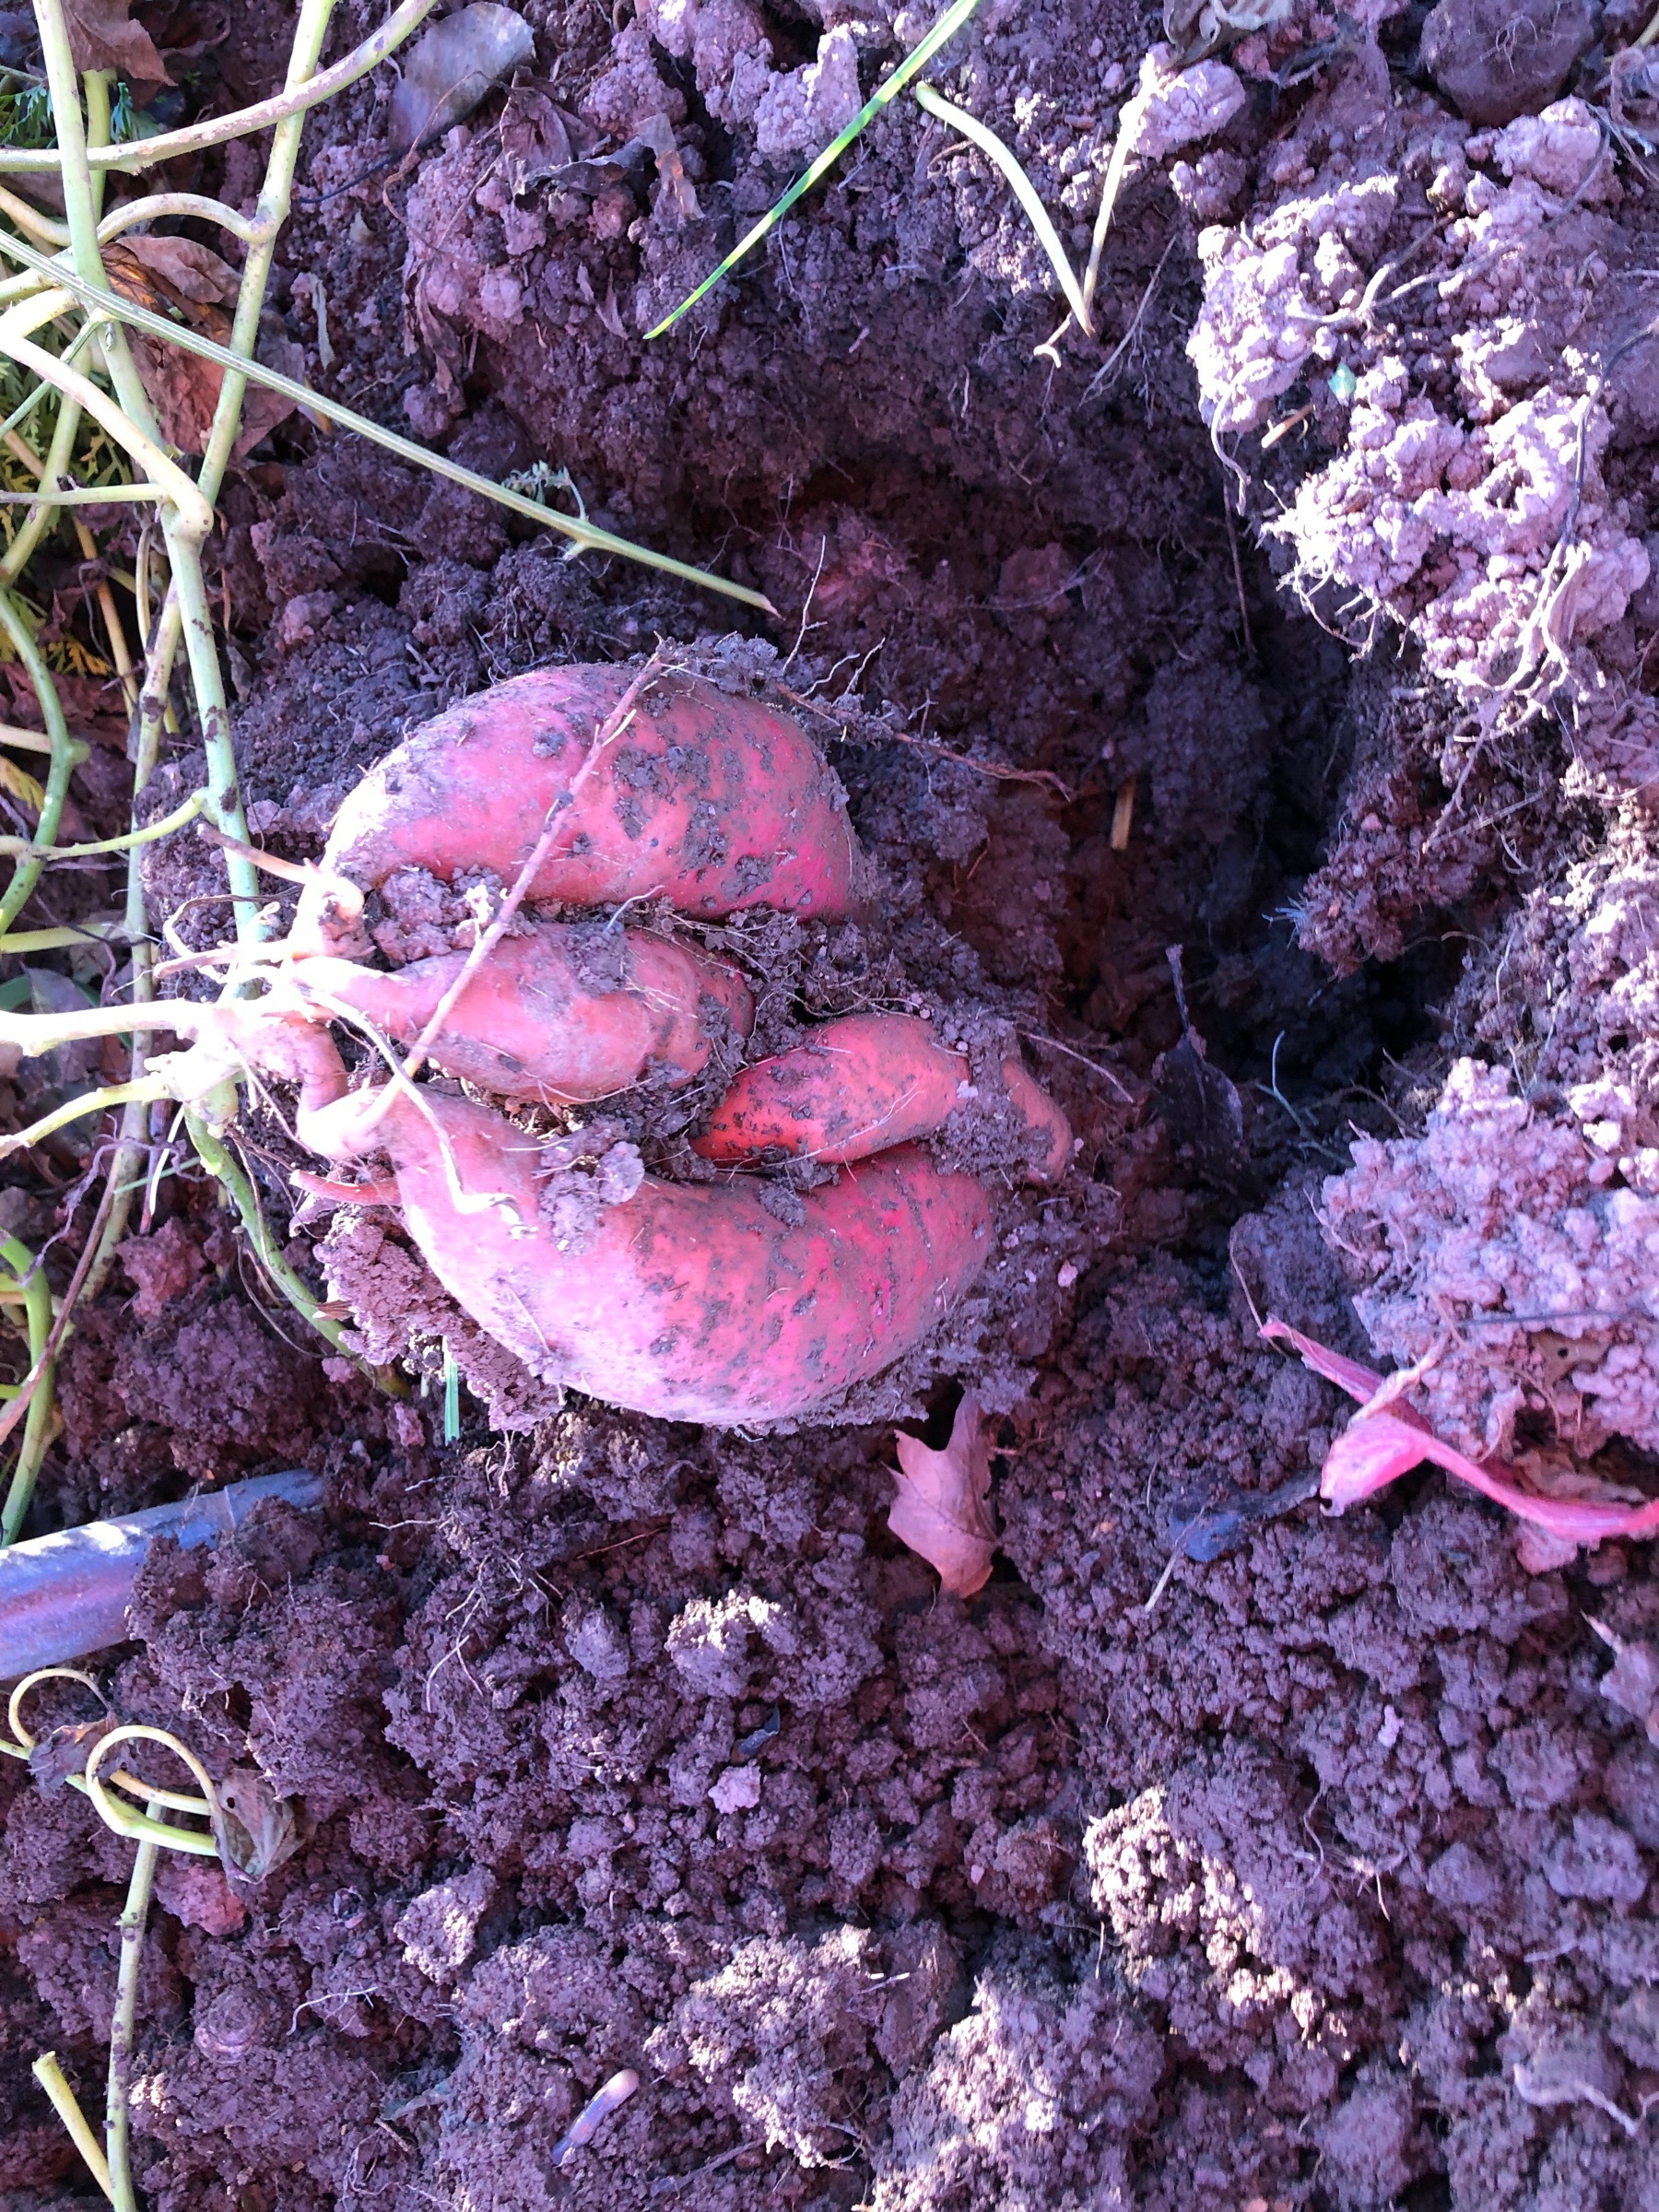 4 large sweet potatoes sitting in the soil as they are being dug up